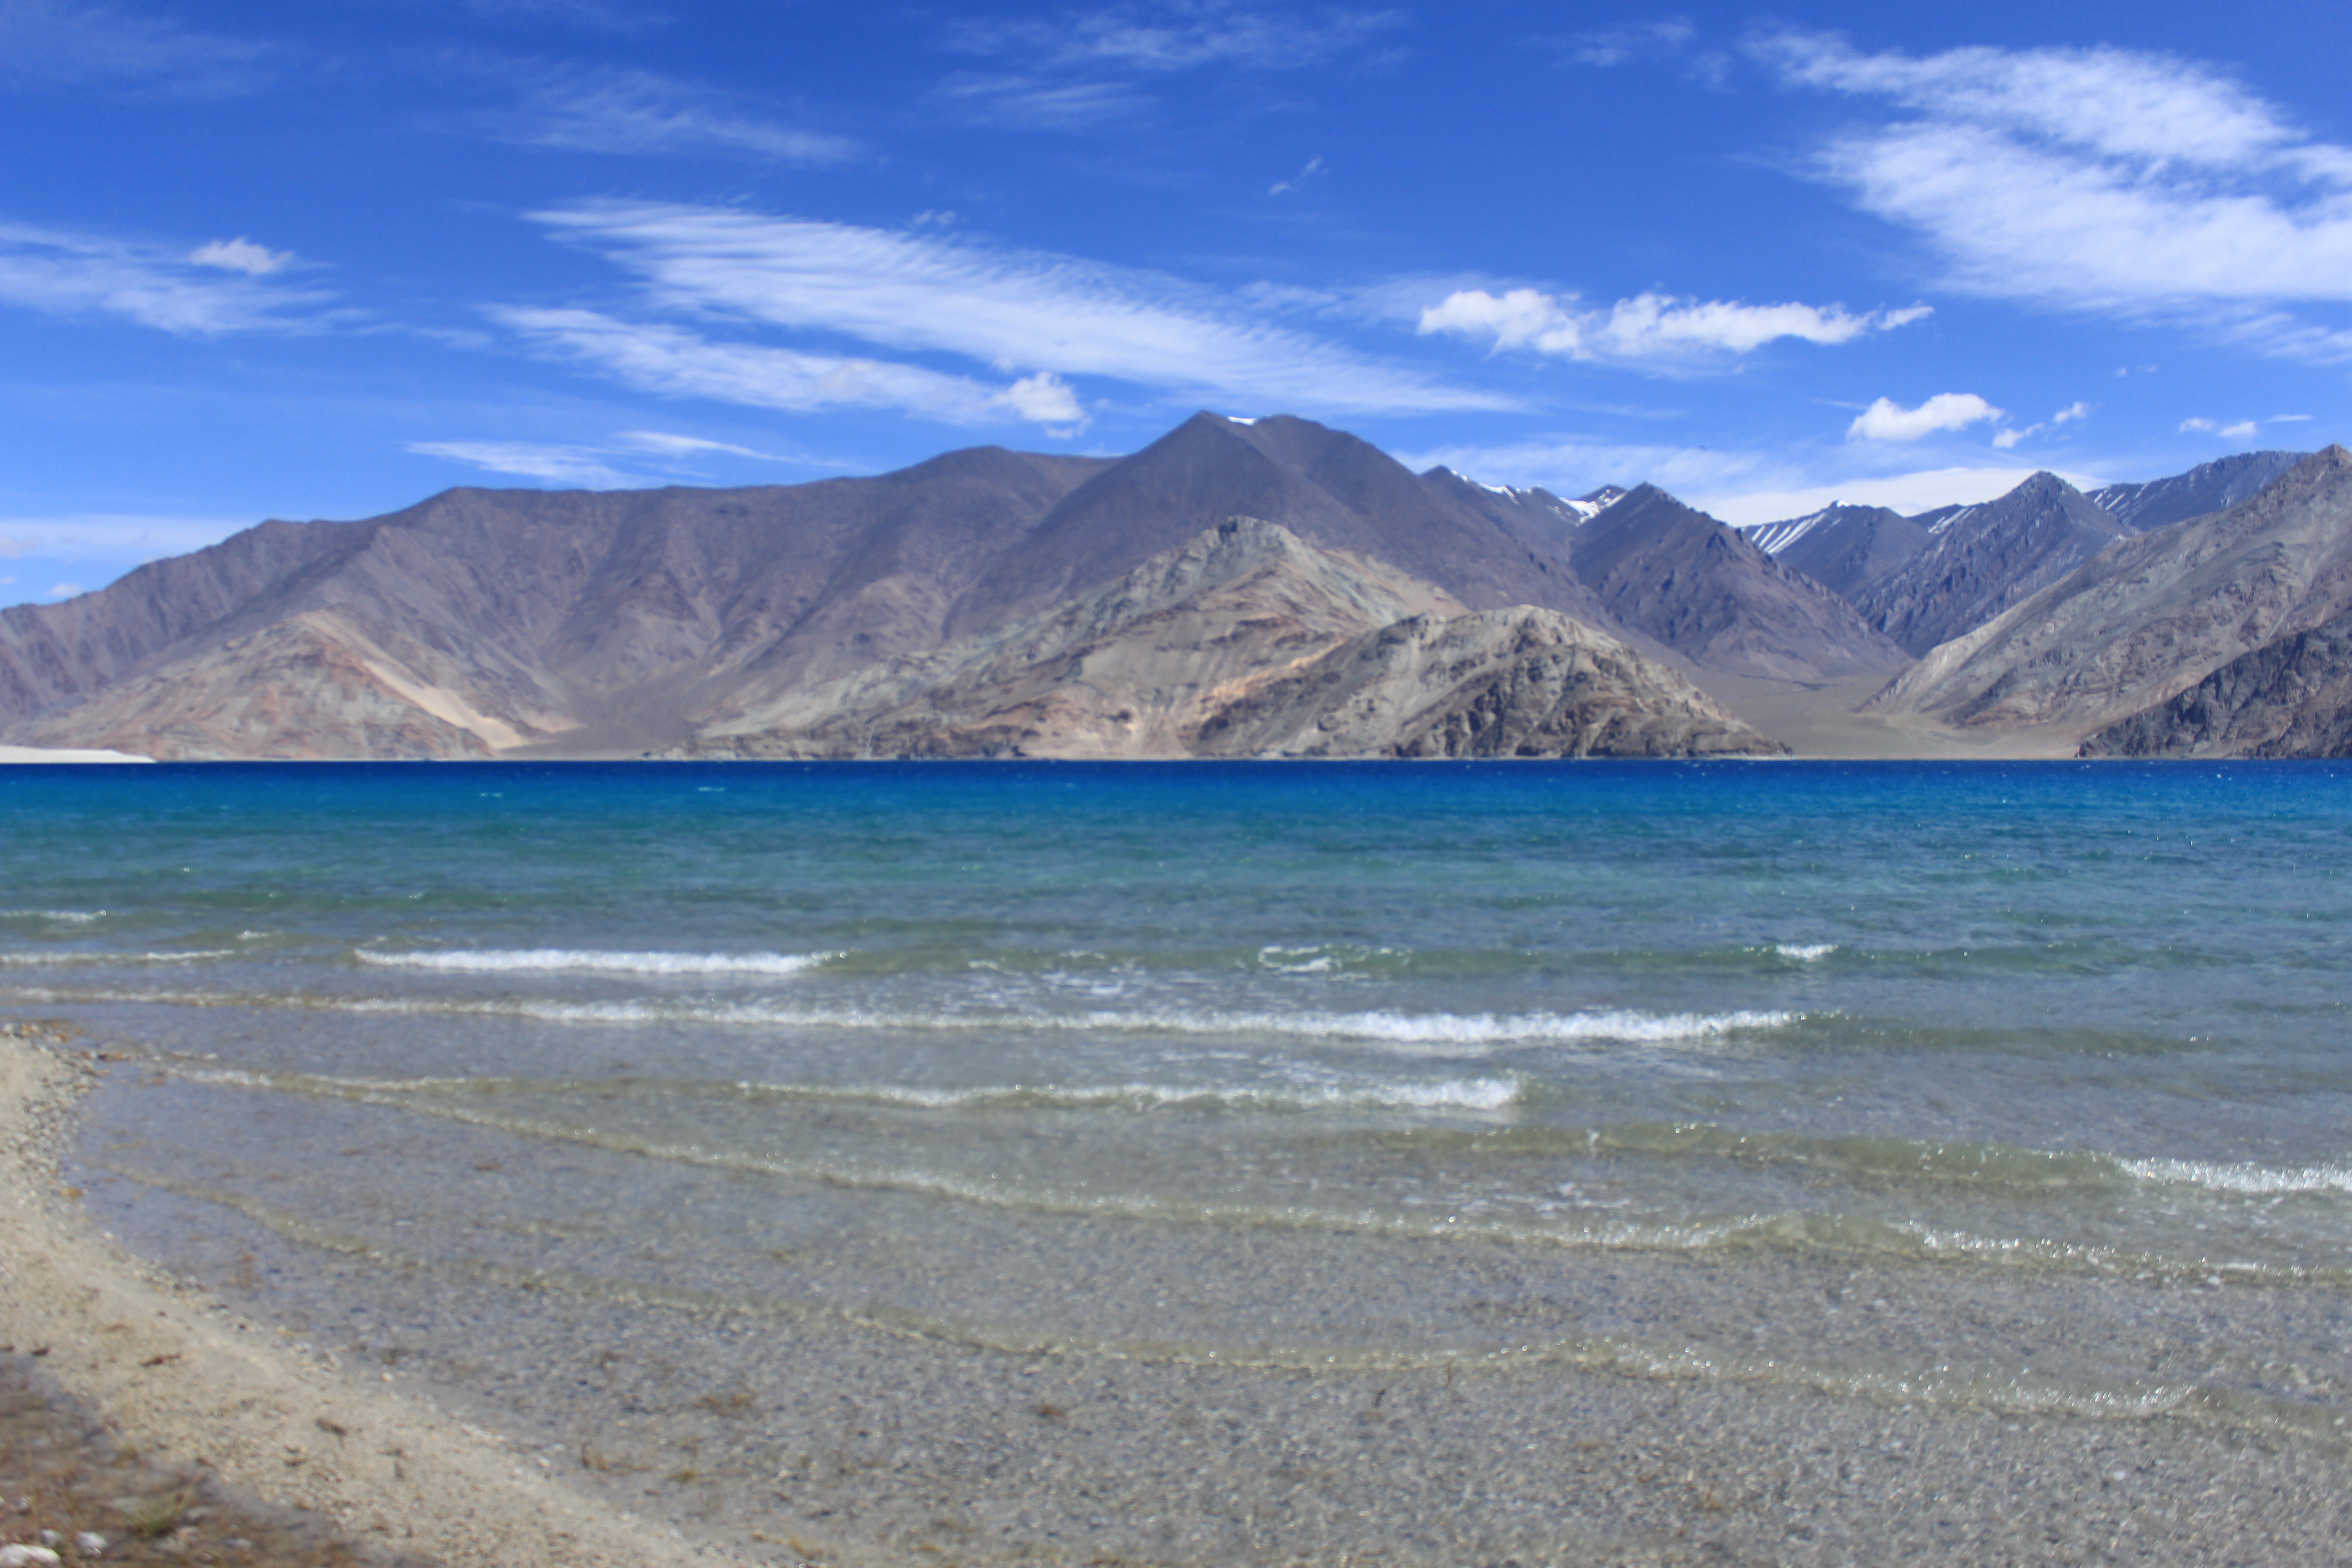 Pangong Lake with clear waters